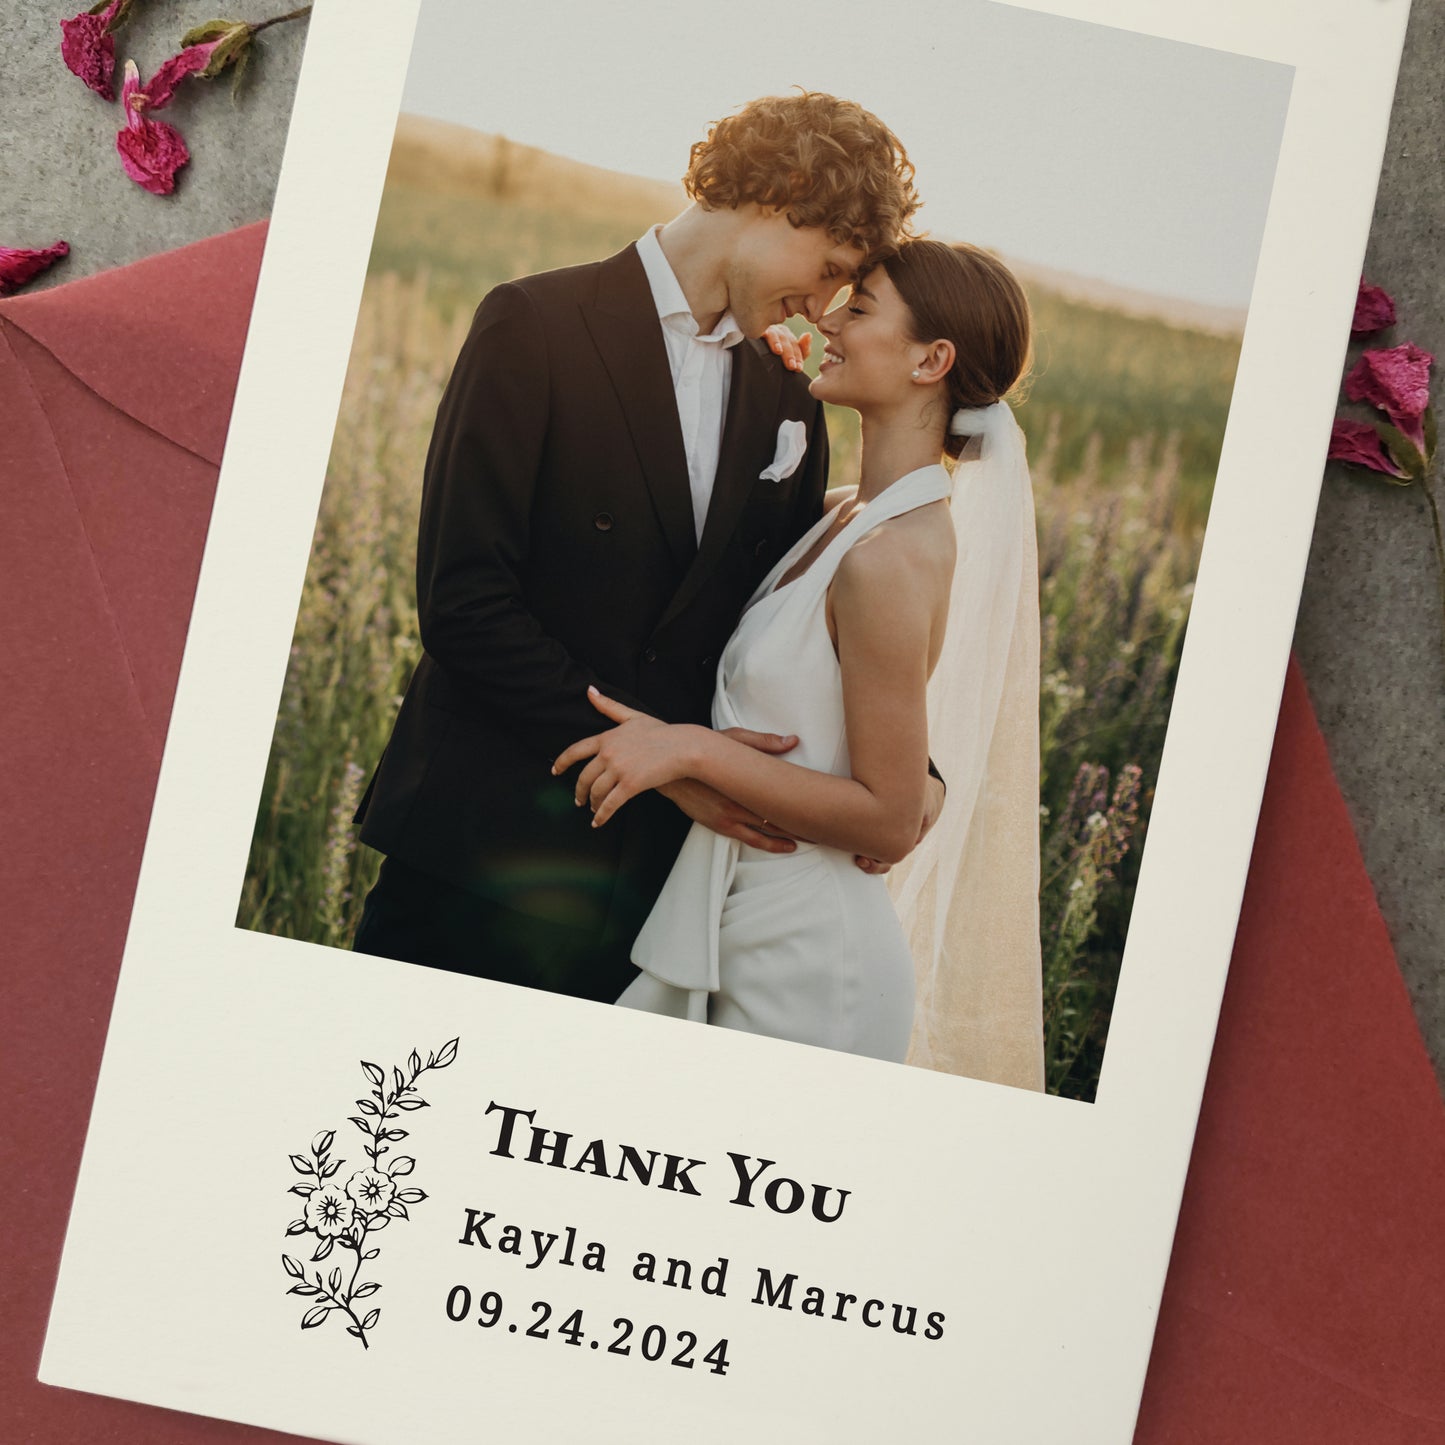 wedding thank you cards with custom photo, names, wedding date and flower branch - XOXOKristen